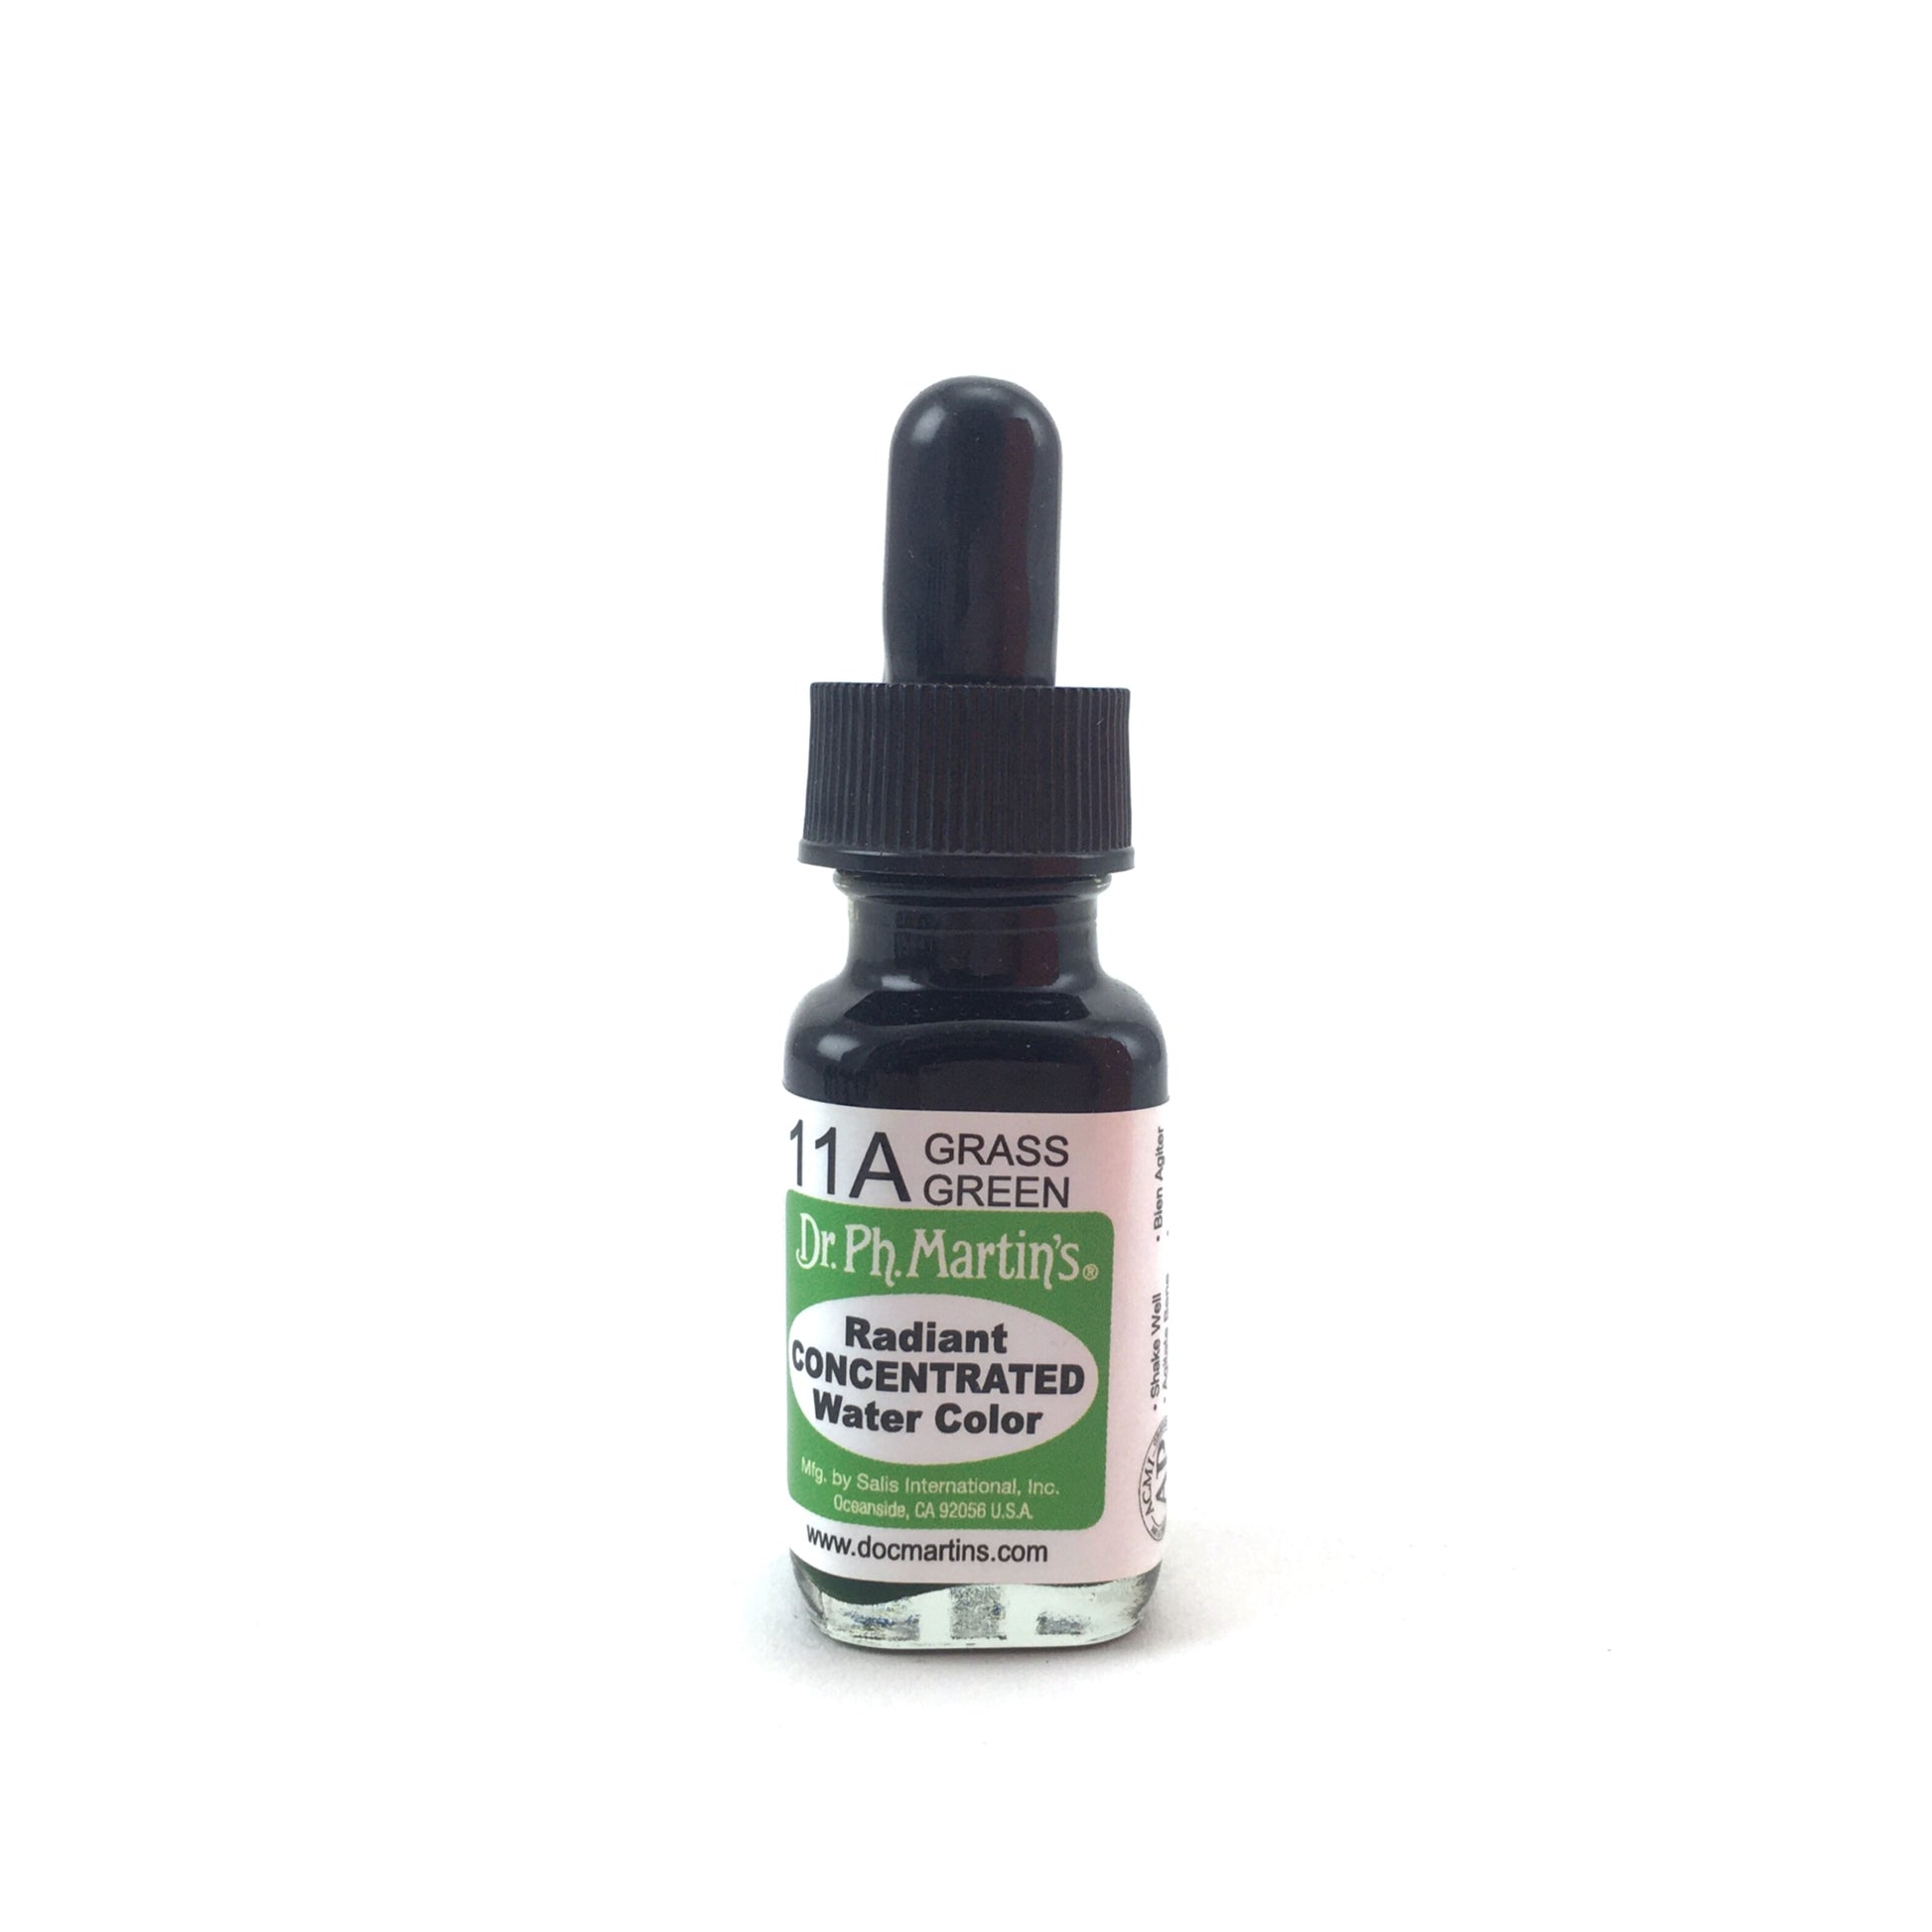 Dr. Ph. Martin's Radiant Concentrated Watercolor - .50 oz. - 11A - Grass Green by Dr. Ph. Martin’s - K. A. Artist Shop